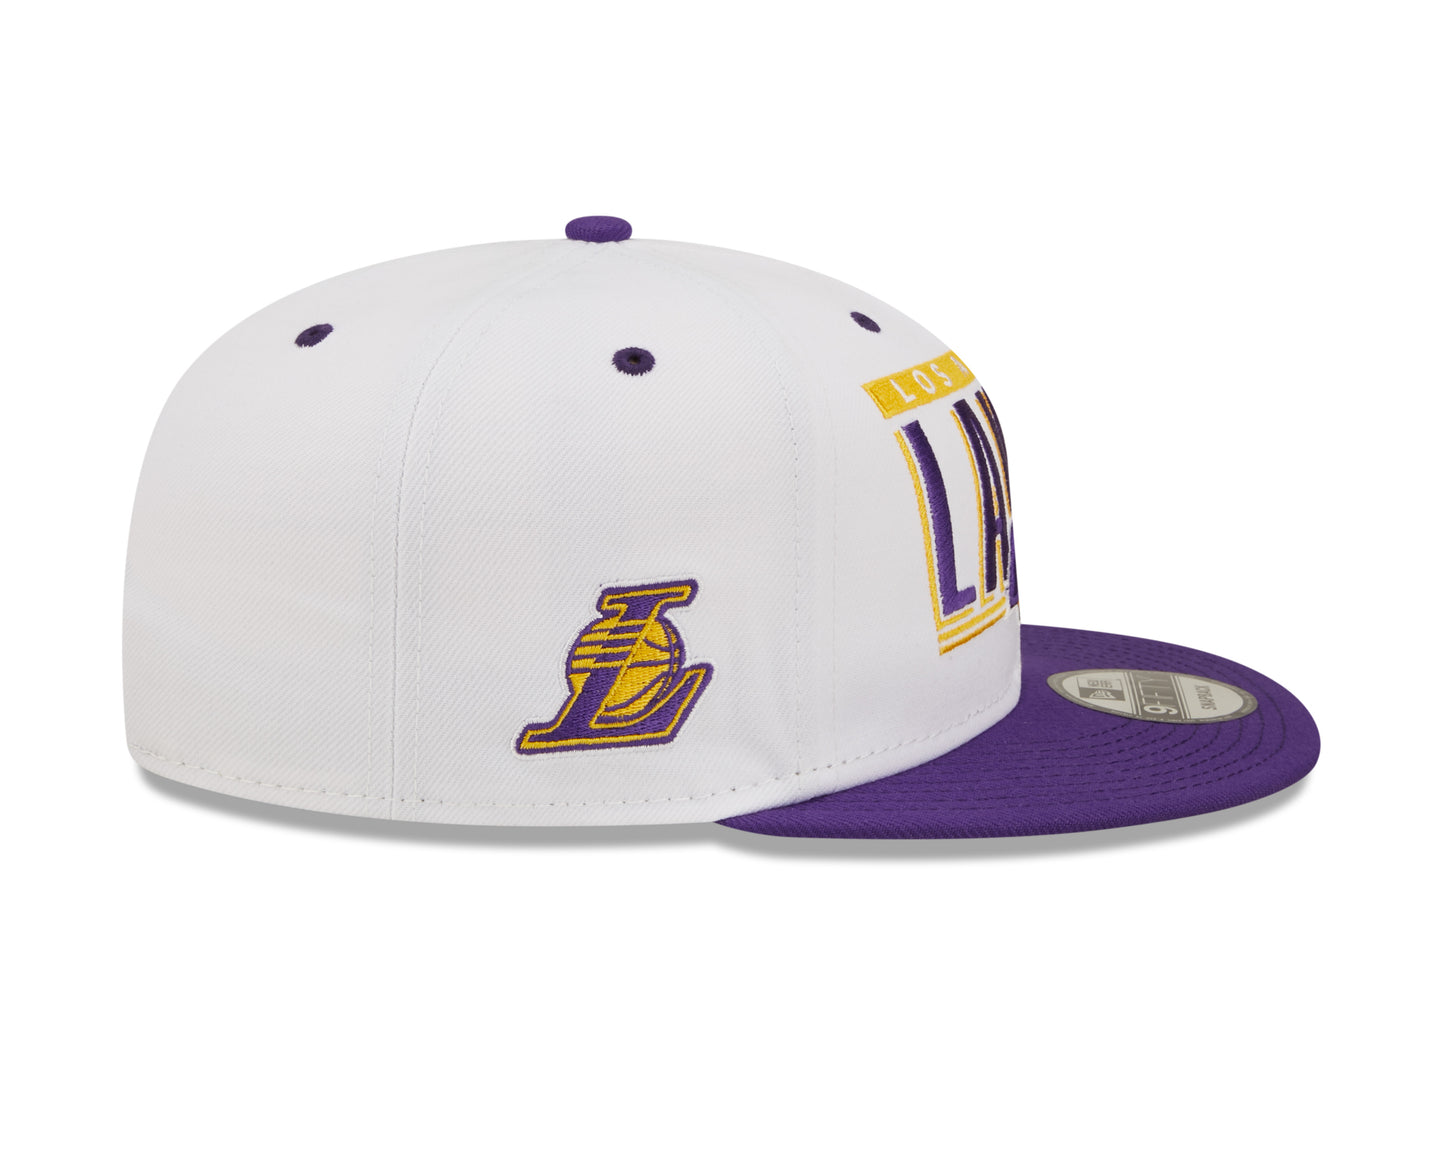 Los Angeles Lakers New Era Retro Title White / Purple 9FIFTY Snap Back Hat